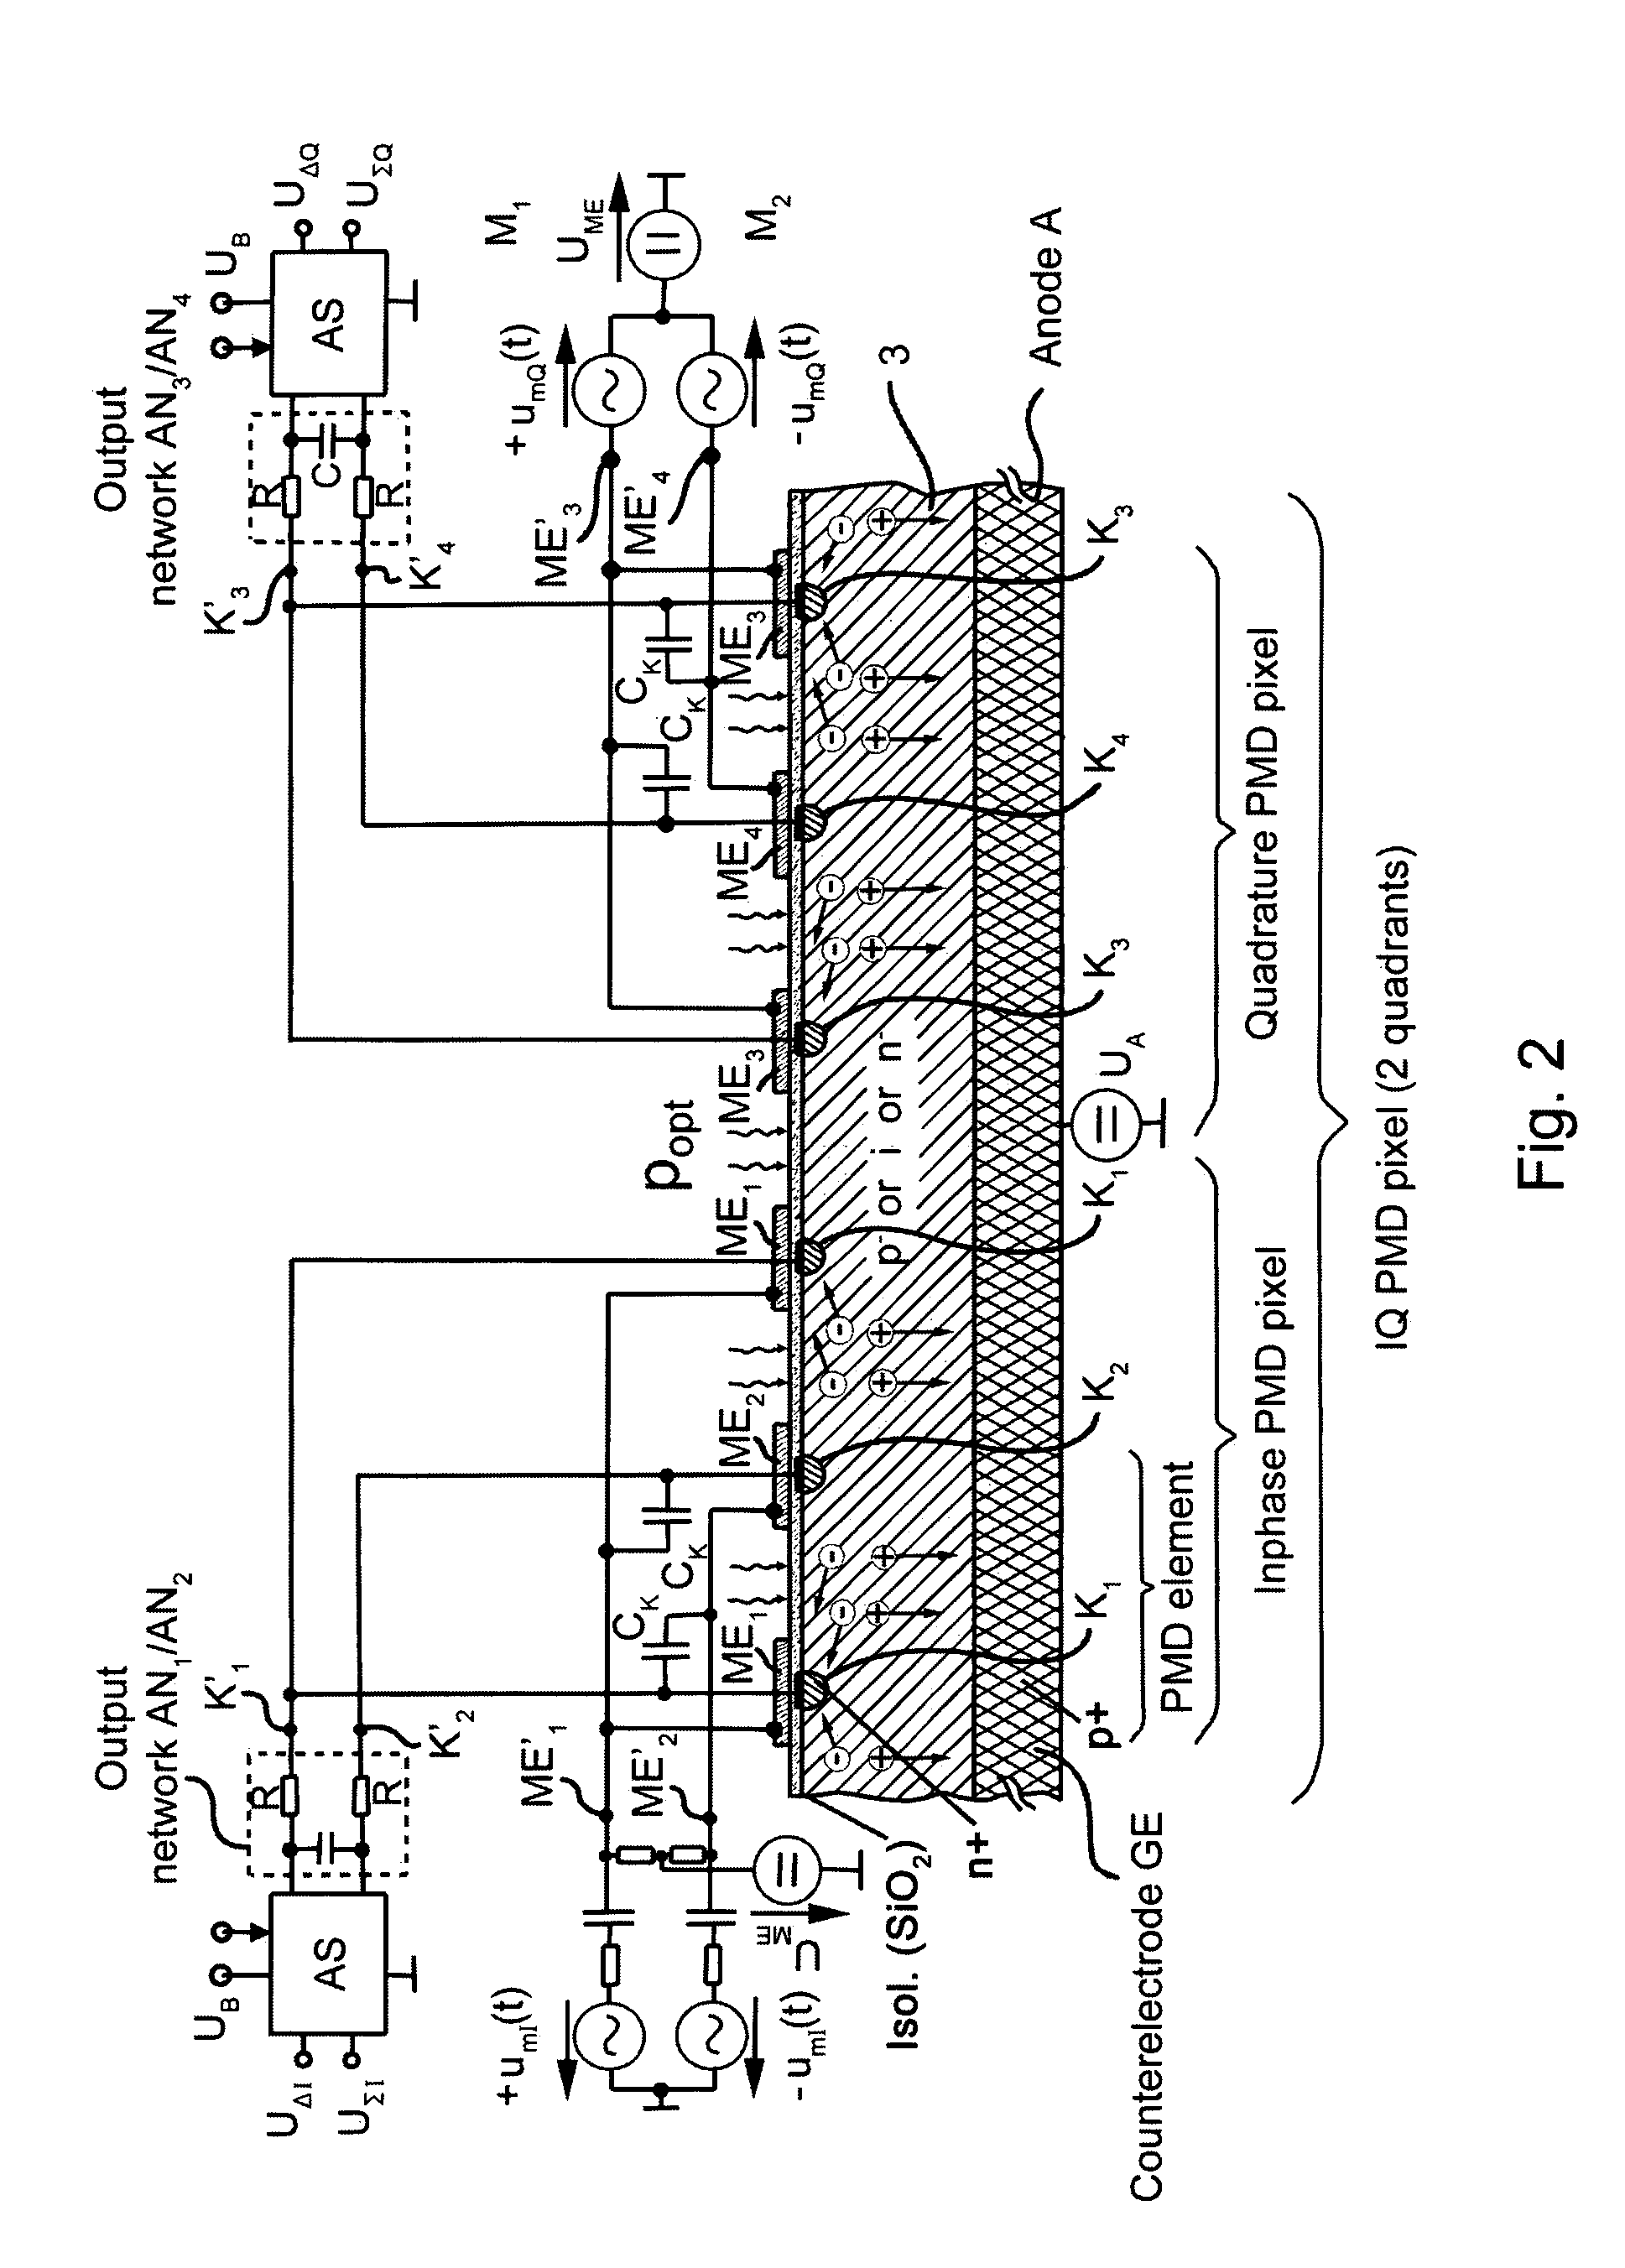 Method and device for detecting and processing signal waves